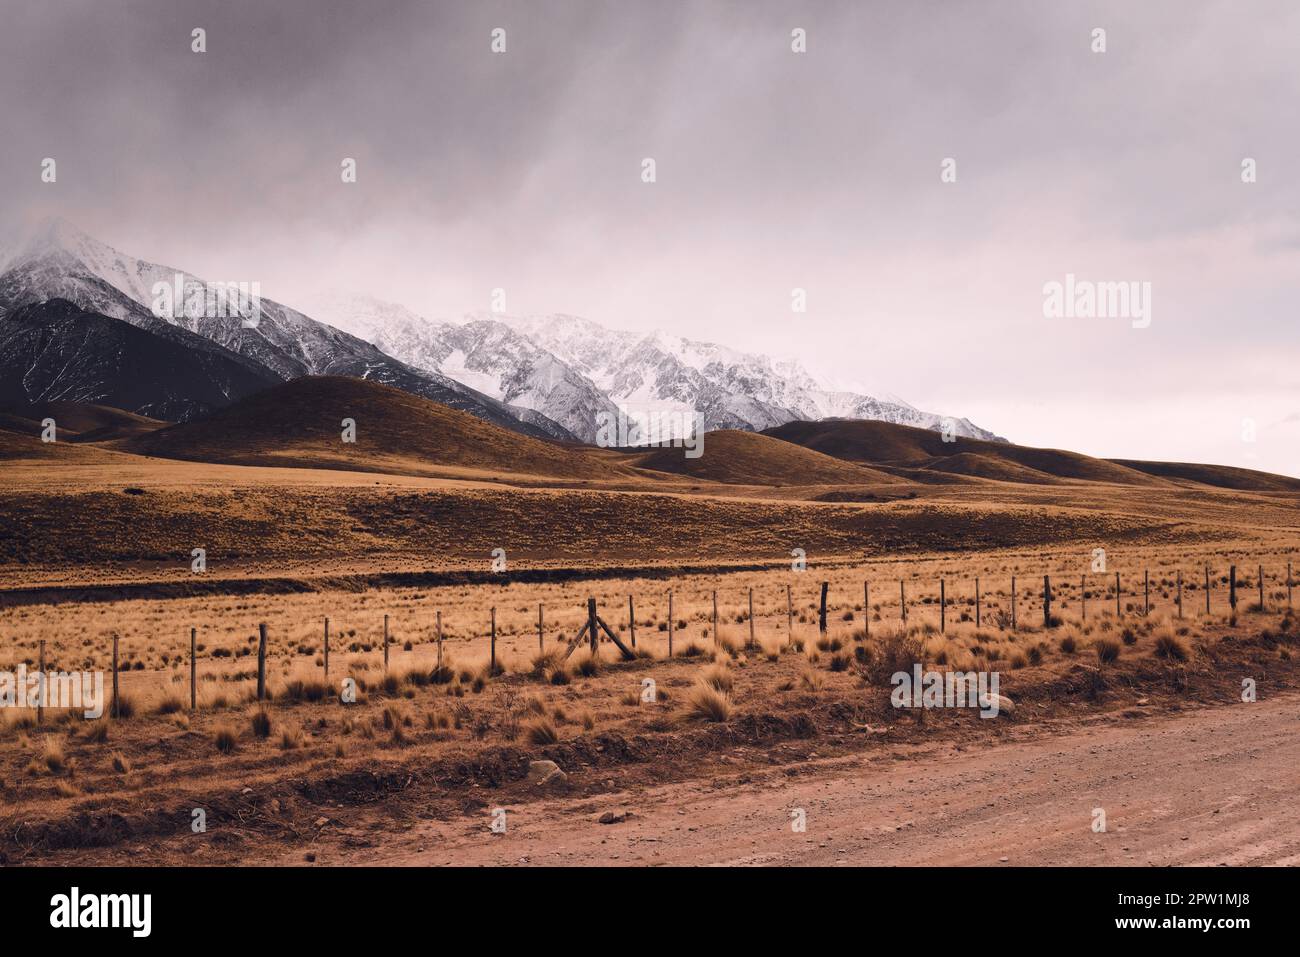 Dry grassland with rolling hills by the snowy Andes mountains in Valle de Uco, Mendoza, Argentina, in a dark cloudy day. Stock Photo